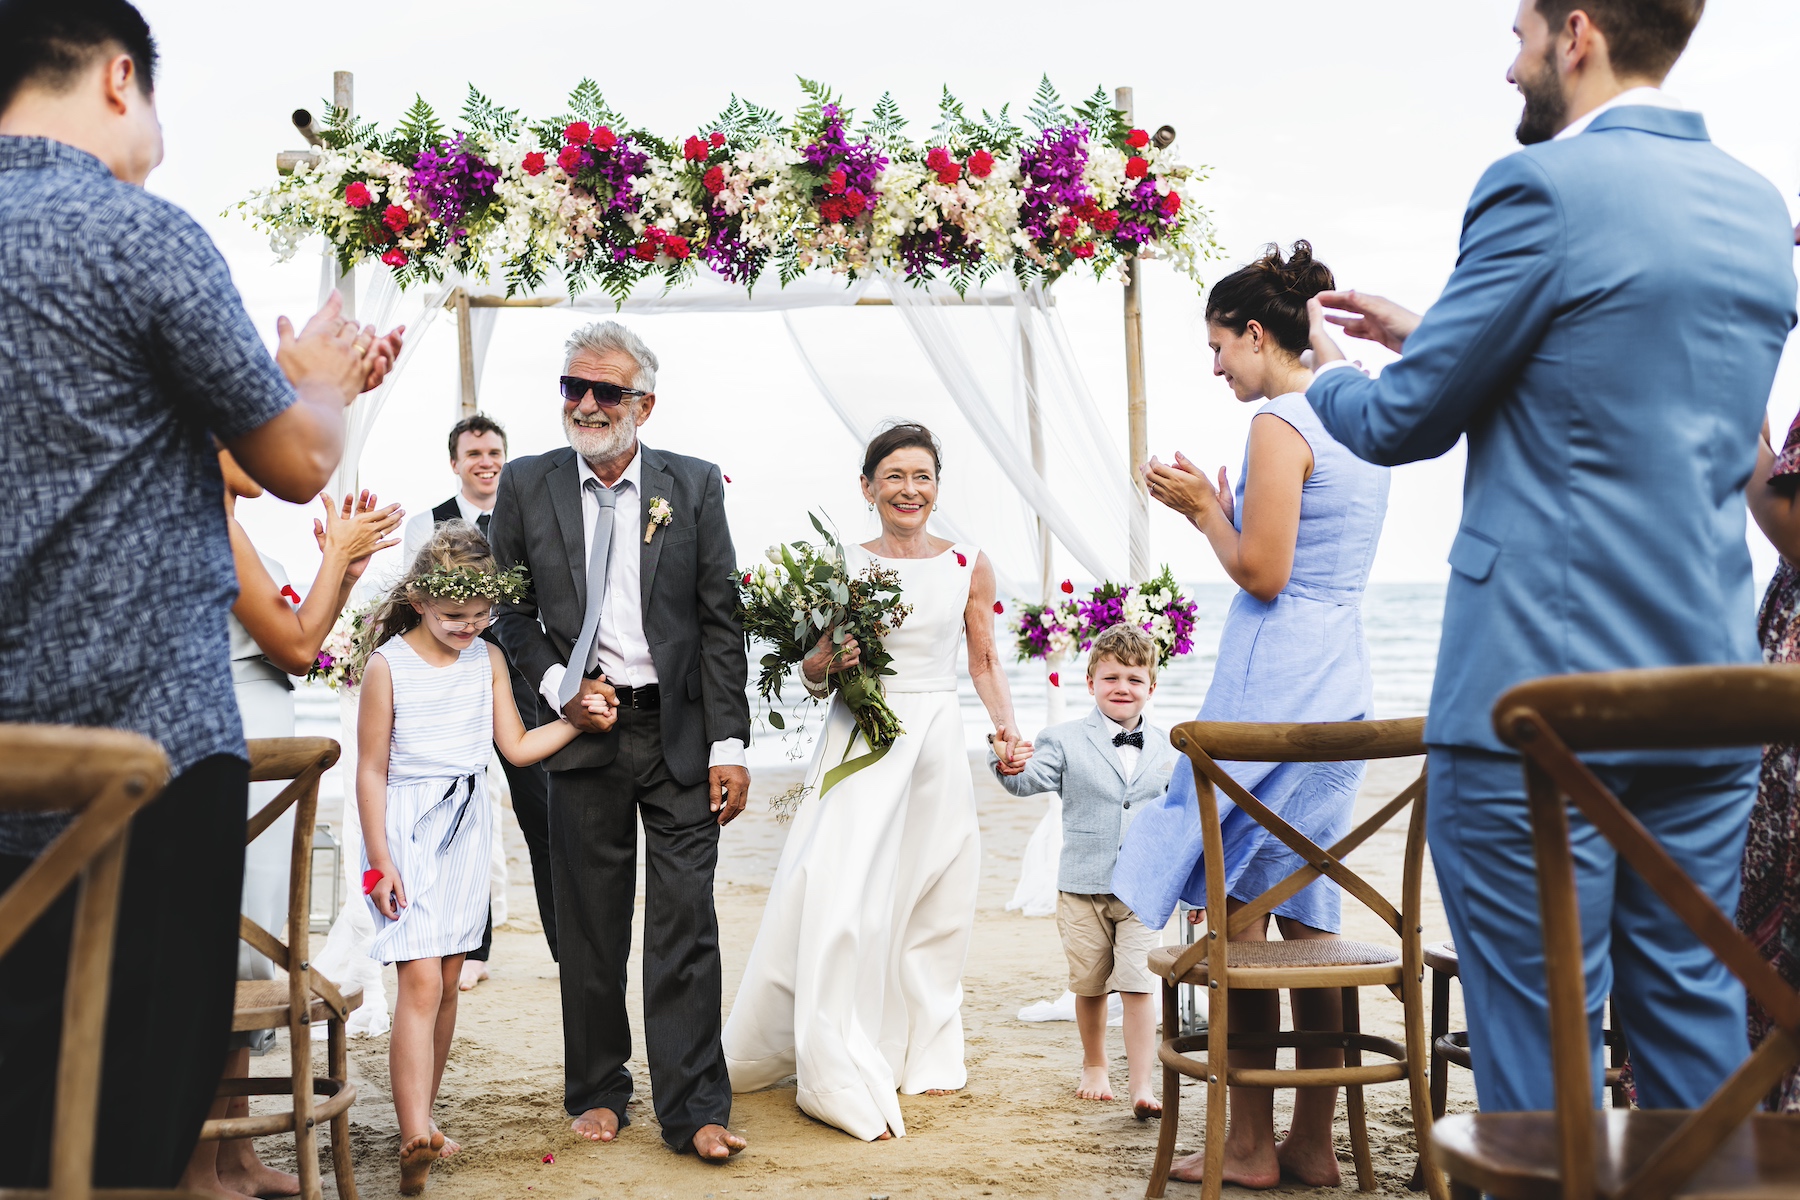 A newly married older couple walks down the aisle at a beach wedding holding their grandchildren's hands